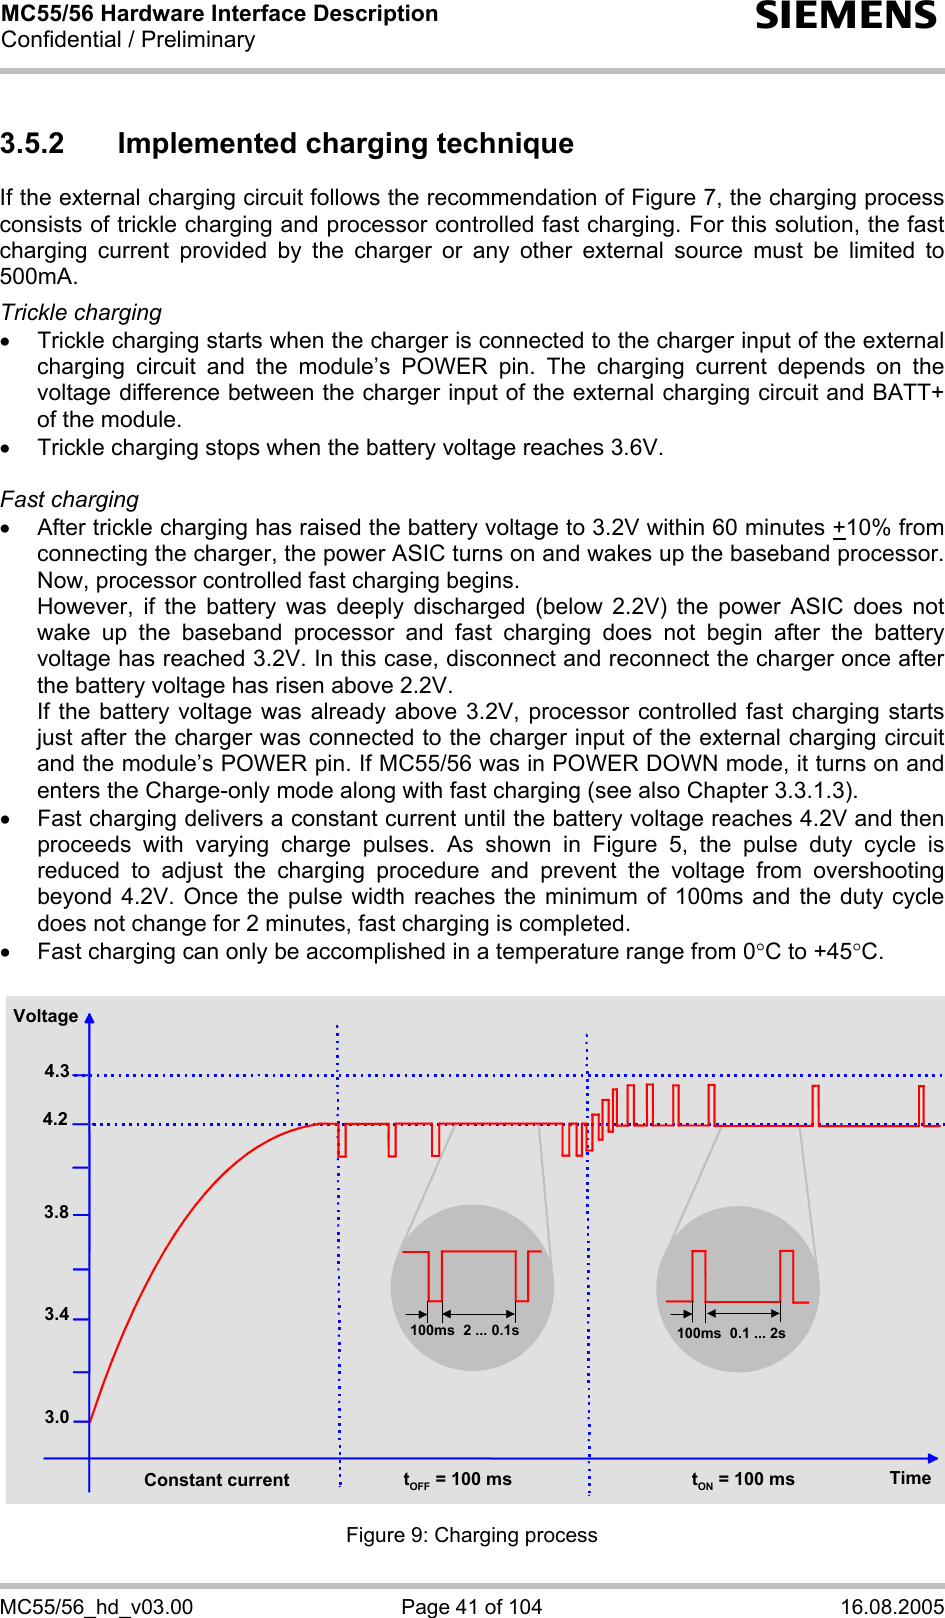 MC55/56 Hardware Interface Description Confidential / Preliminary s MC55/56_hd_v03.00  Page 41 of 104  16.08.2005 3.5.2  Implemented charging technique If the external charging circuit follows the recommendation of Figure 7, the charging process consists of trickle charging and processor controlled fast charging. For this solution, the fast charging current provided by the charger or any other external source must be limited to 500mA.   Trickle charging •  Trickle charging starts when the charger is connected to the charger input of the external charging circuit and the module’s POWER pin. The charging current depends on the voltage difference between the charger input of the external charging circuit and BATT+ of the module.  •  Trickle charging stops when the battery voltage reaches 3.6V.  Fast charging  •  After trickle charging has raised the battery voltage to 3.2V within 60 minutes +10% from connecting the charger, the power ASIC turns on and wakes up the baseband processor. Now, processor controlled fast charging begins.  However, if the battery was deeply discharged (below 2.2V) the power ASIC does not wake up the baseband processor and fast charging does not begin after the battery voltage has reached 3.2V. In this case, disconnect and reconnect the charger once after the battery voltage has risen above 2.2V. If the battery voltage was already above 3.2V, processor controlled fast charging starts just after the charger was connected to the charger input of the external charging circuit and the module’s POWER pin. If MC55/56 was in POWER DOWN mode, it turns on and enters the Charge-only mode along with fast charging (see also Chapter 3.3.1.3). •  Fast charging delivers a constant current until the battery voltage reaches 4.2V and then proceeds with varying charge pulses. As shown in Figure 5, the pulse duty cycle is reduced to adjust the charging procedure and prevent the voltage from overshooting beyond 4.2V. Once the pulse width reaches the minimum of 100ms and the duty cycle does not change for 2 minutes, fast charging is completed. •  Fast charging can only be accomplished in a temperature range from 0°C to +45°C.  4.34.23.8Voltage3.43.0Constant current tOFF = 100 ms tON = 100 ms Time100ms 2 ... 0.1s 100ms 0.1 ... 2s  Figure 9: Charging process 